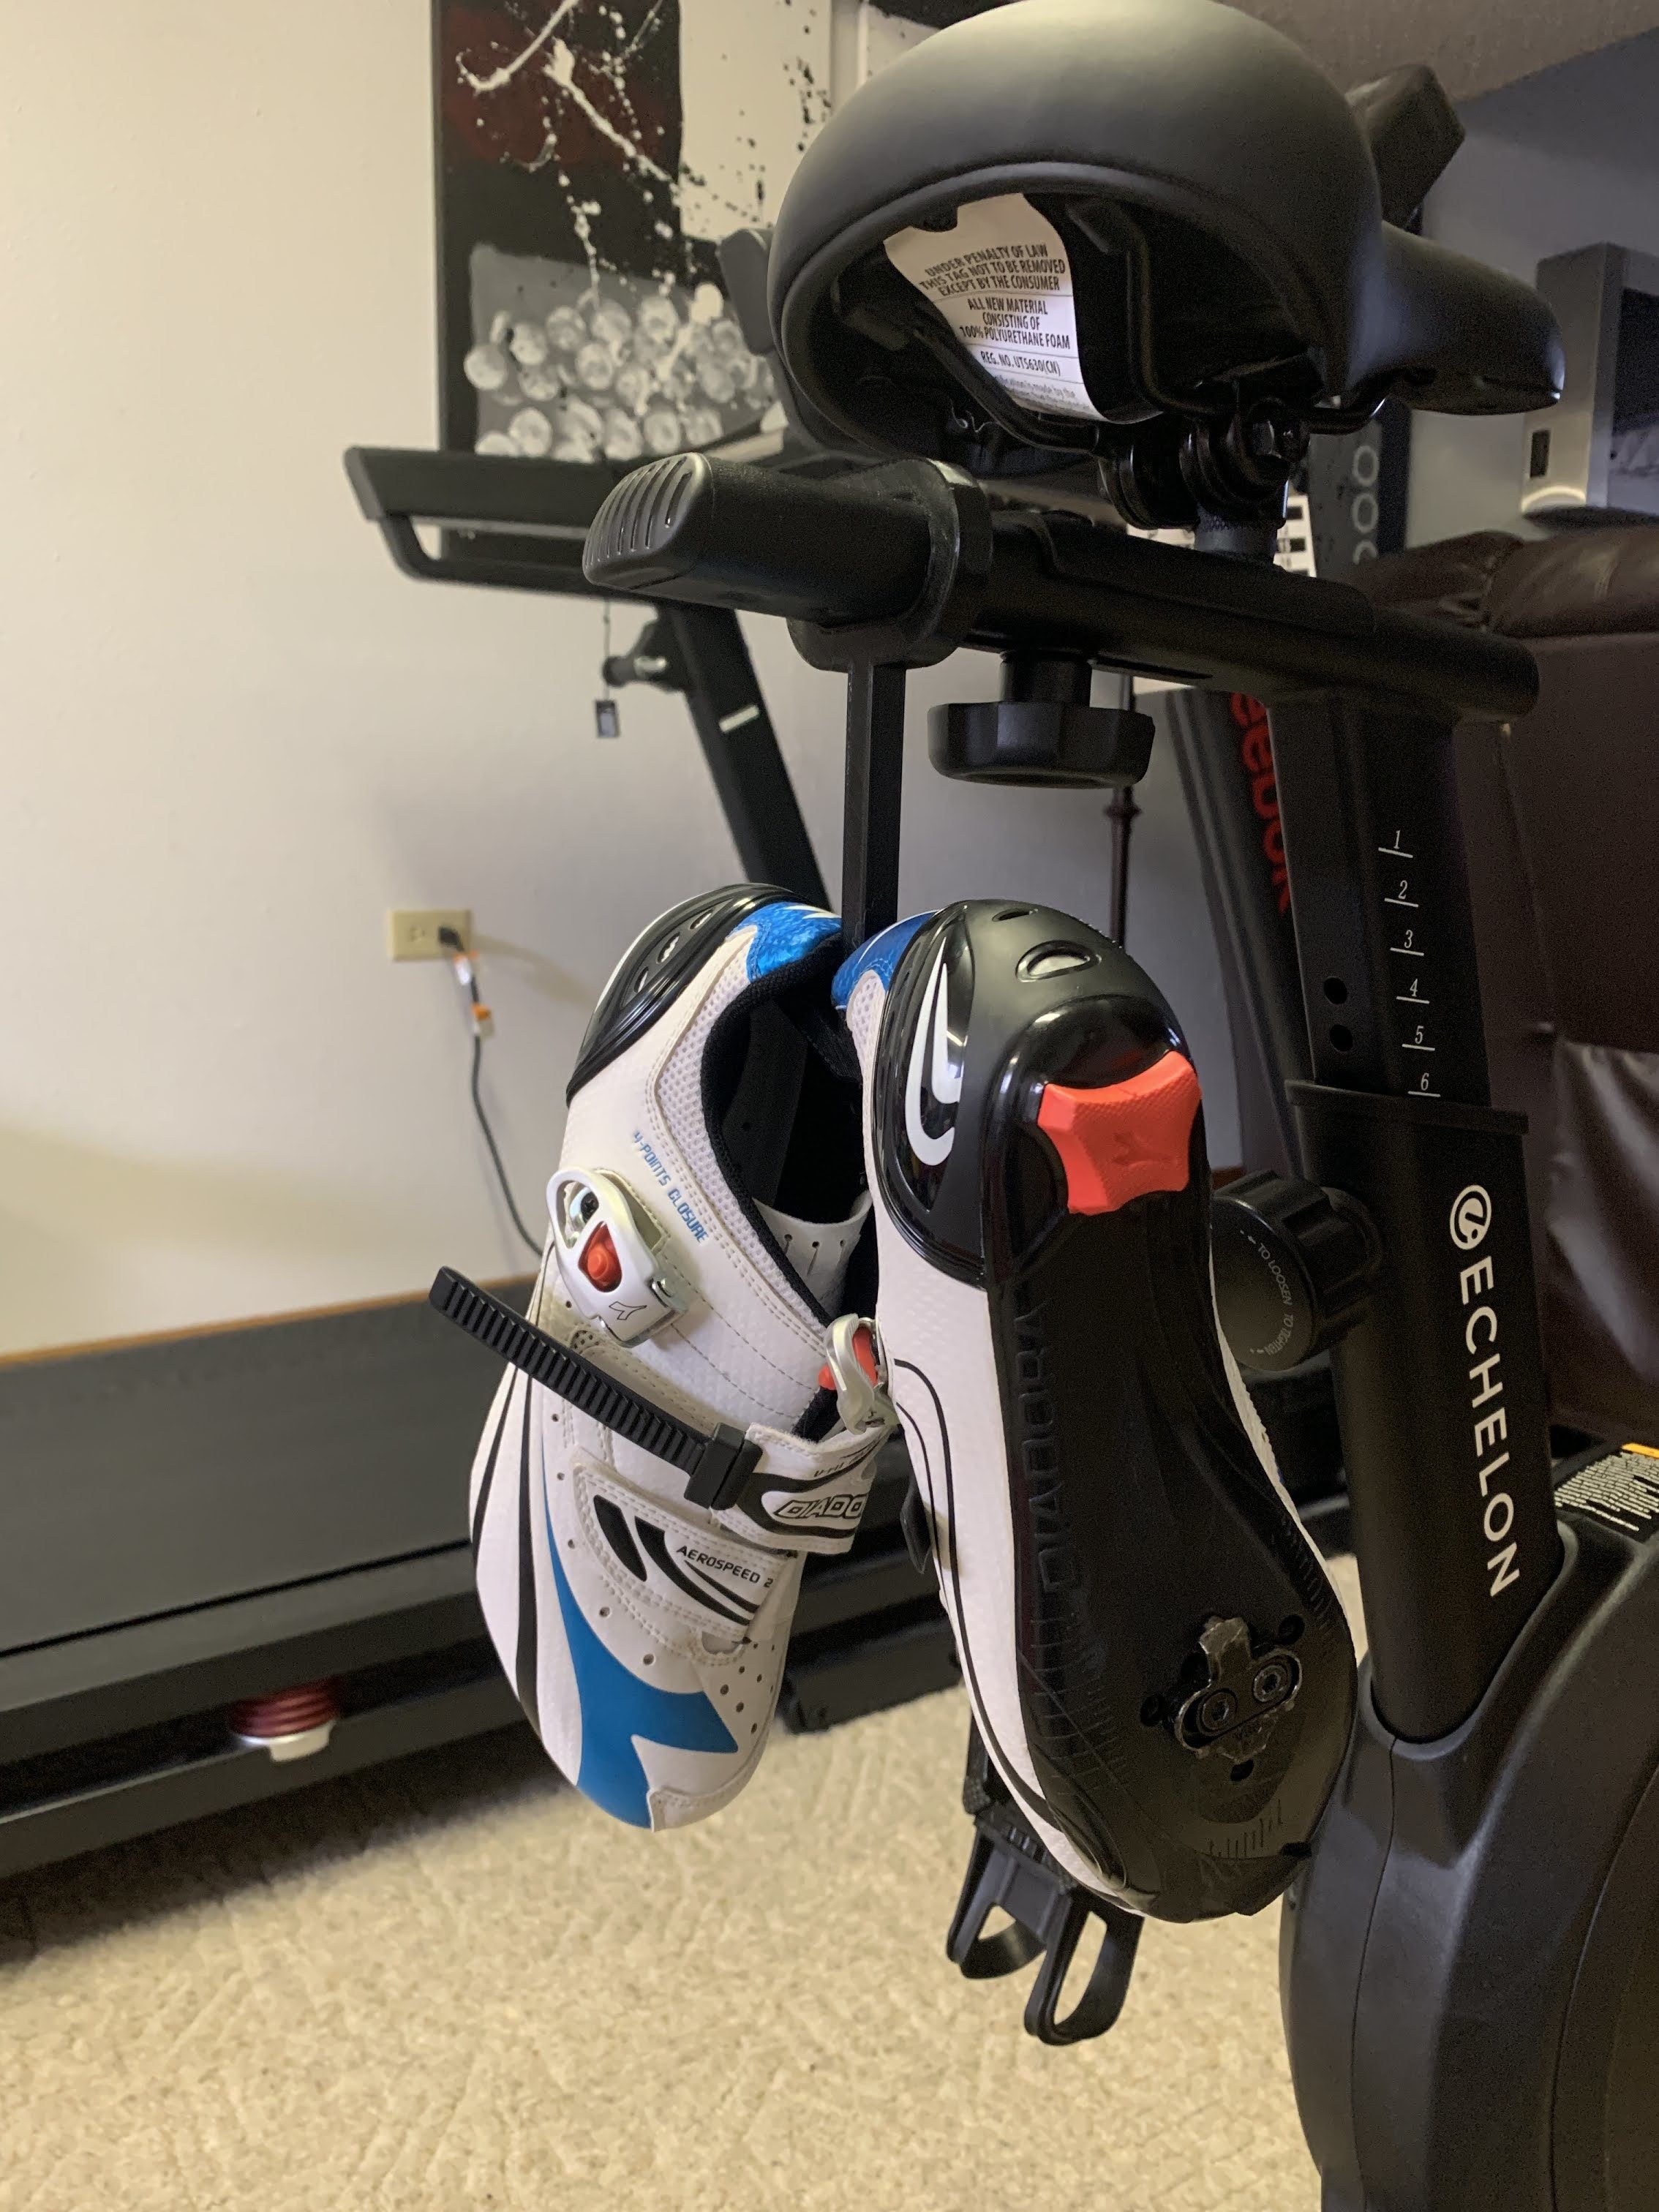 Walmart Echelon Connect Sport Spin Bike 699 99 Accepting Pre Orders Ship Feb 21 Page 89 Redflagdeals Com Forums